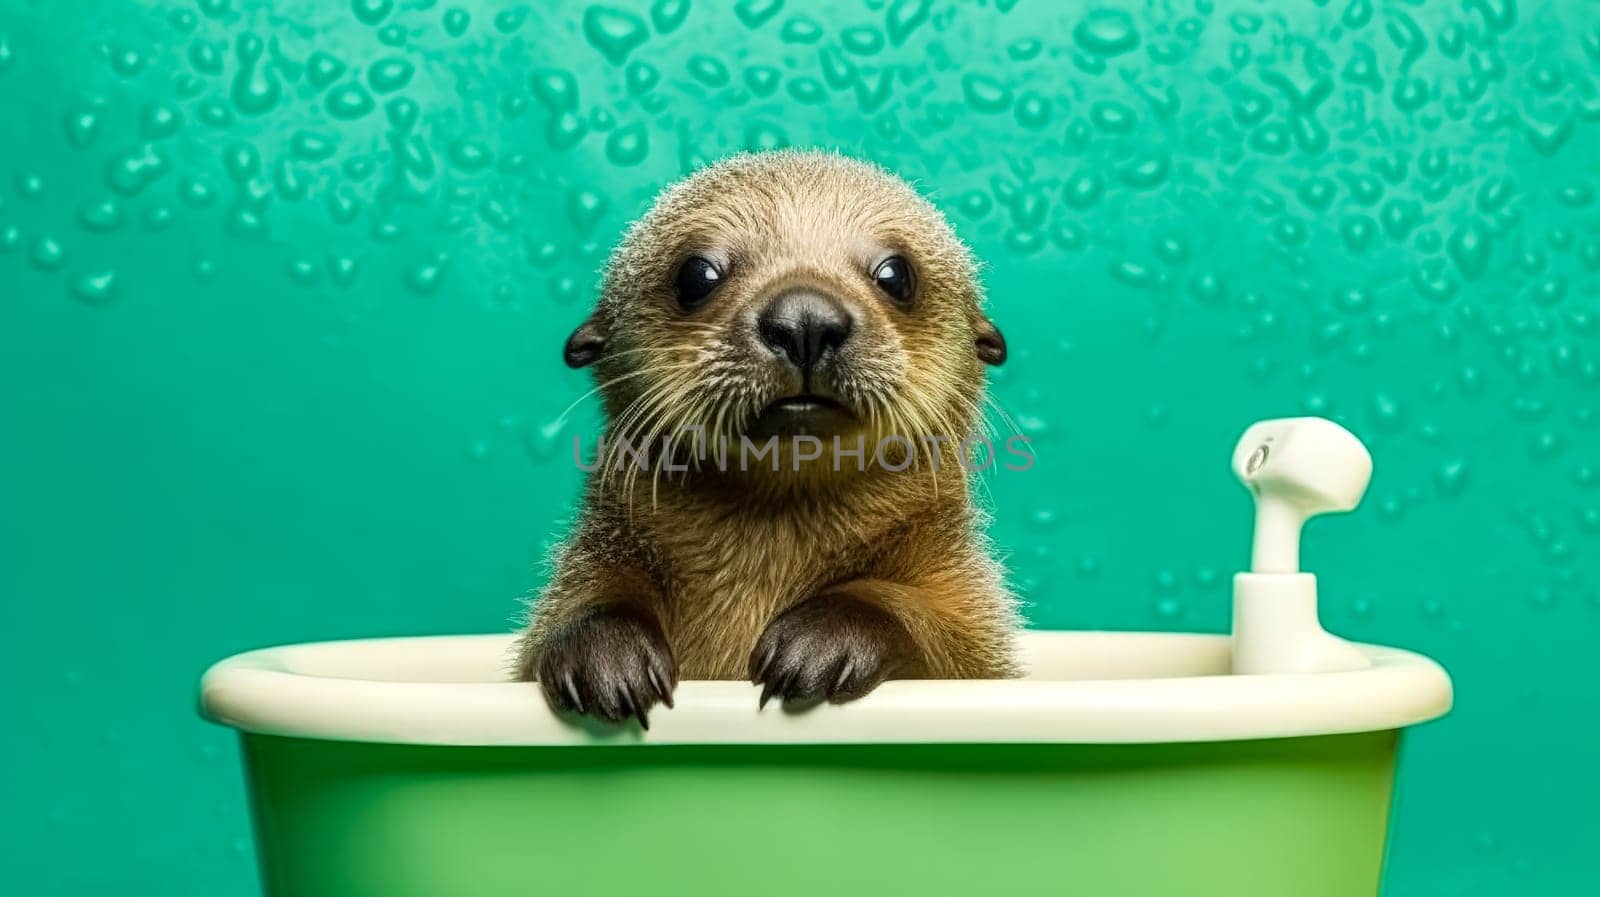 An otter in the bathroom on a green background by Alla_Morozova93